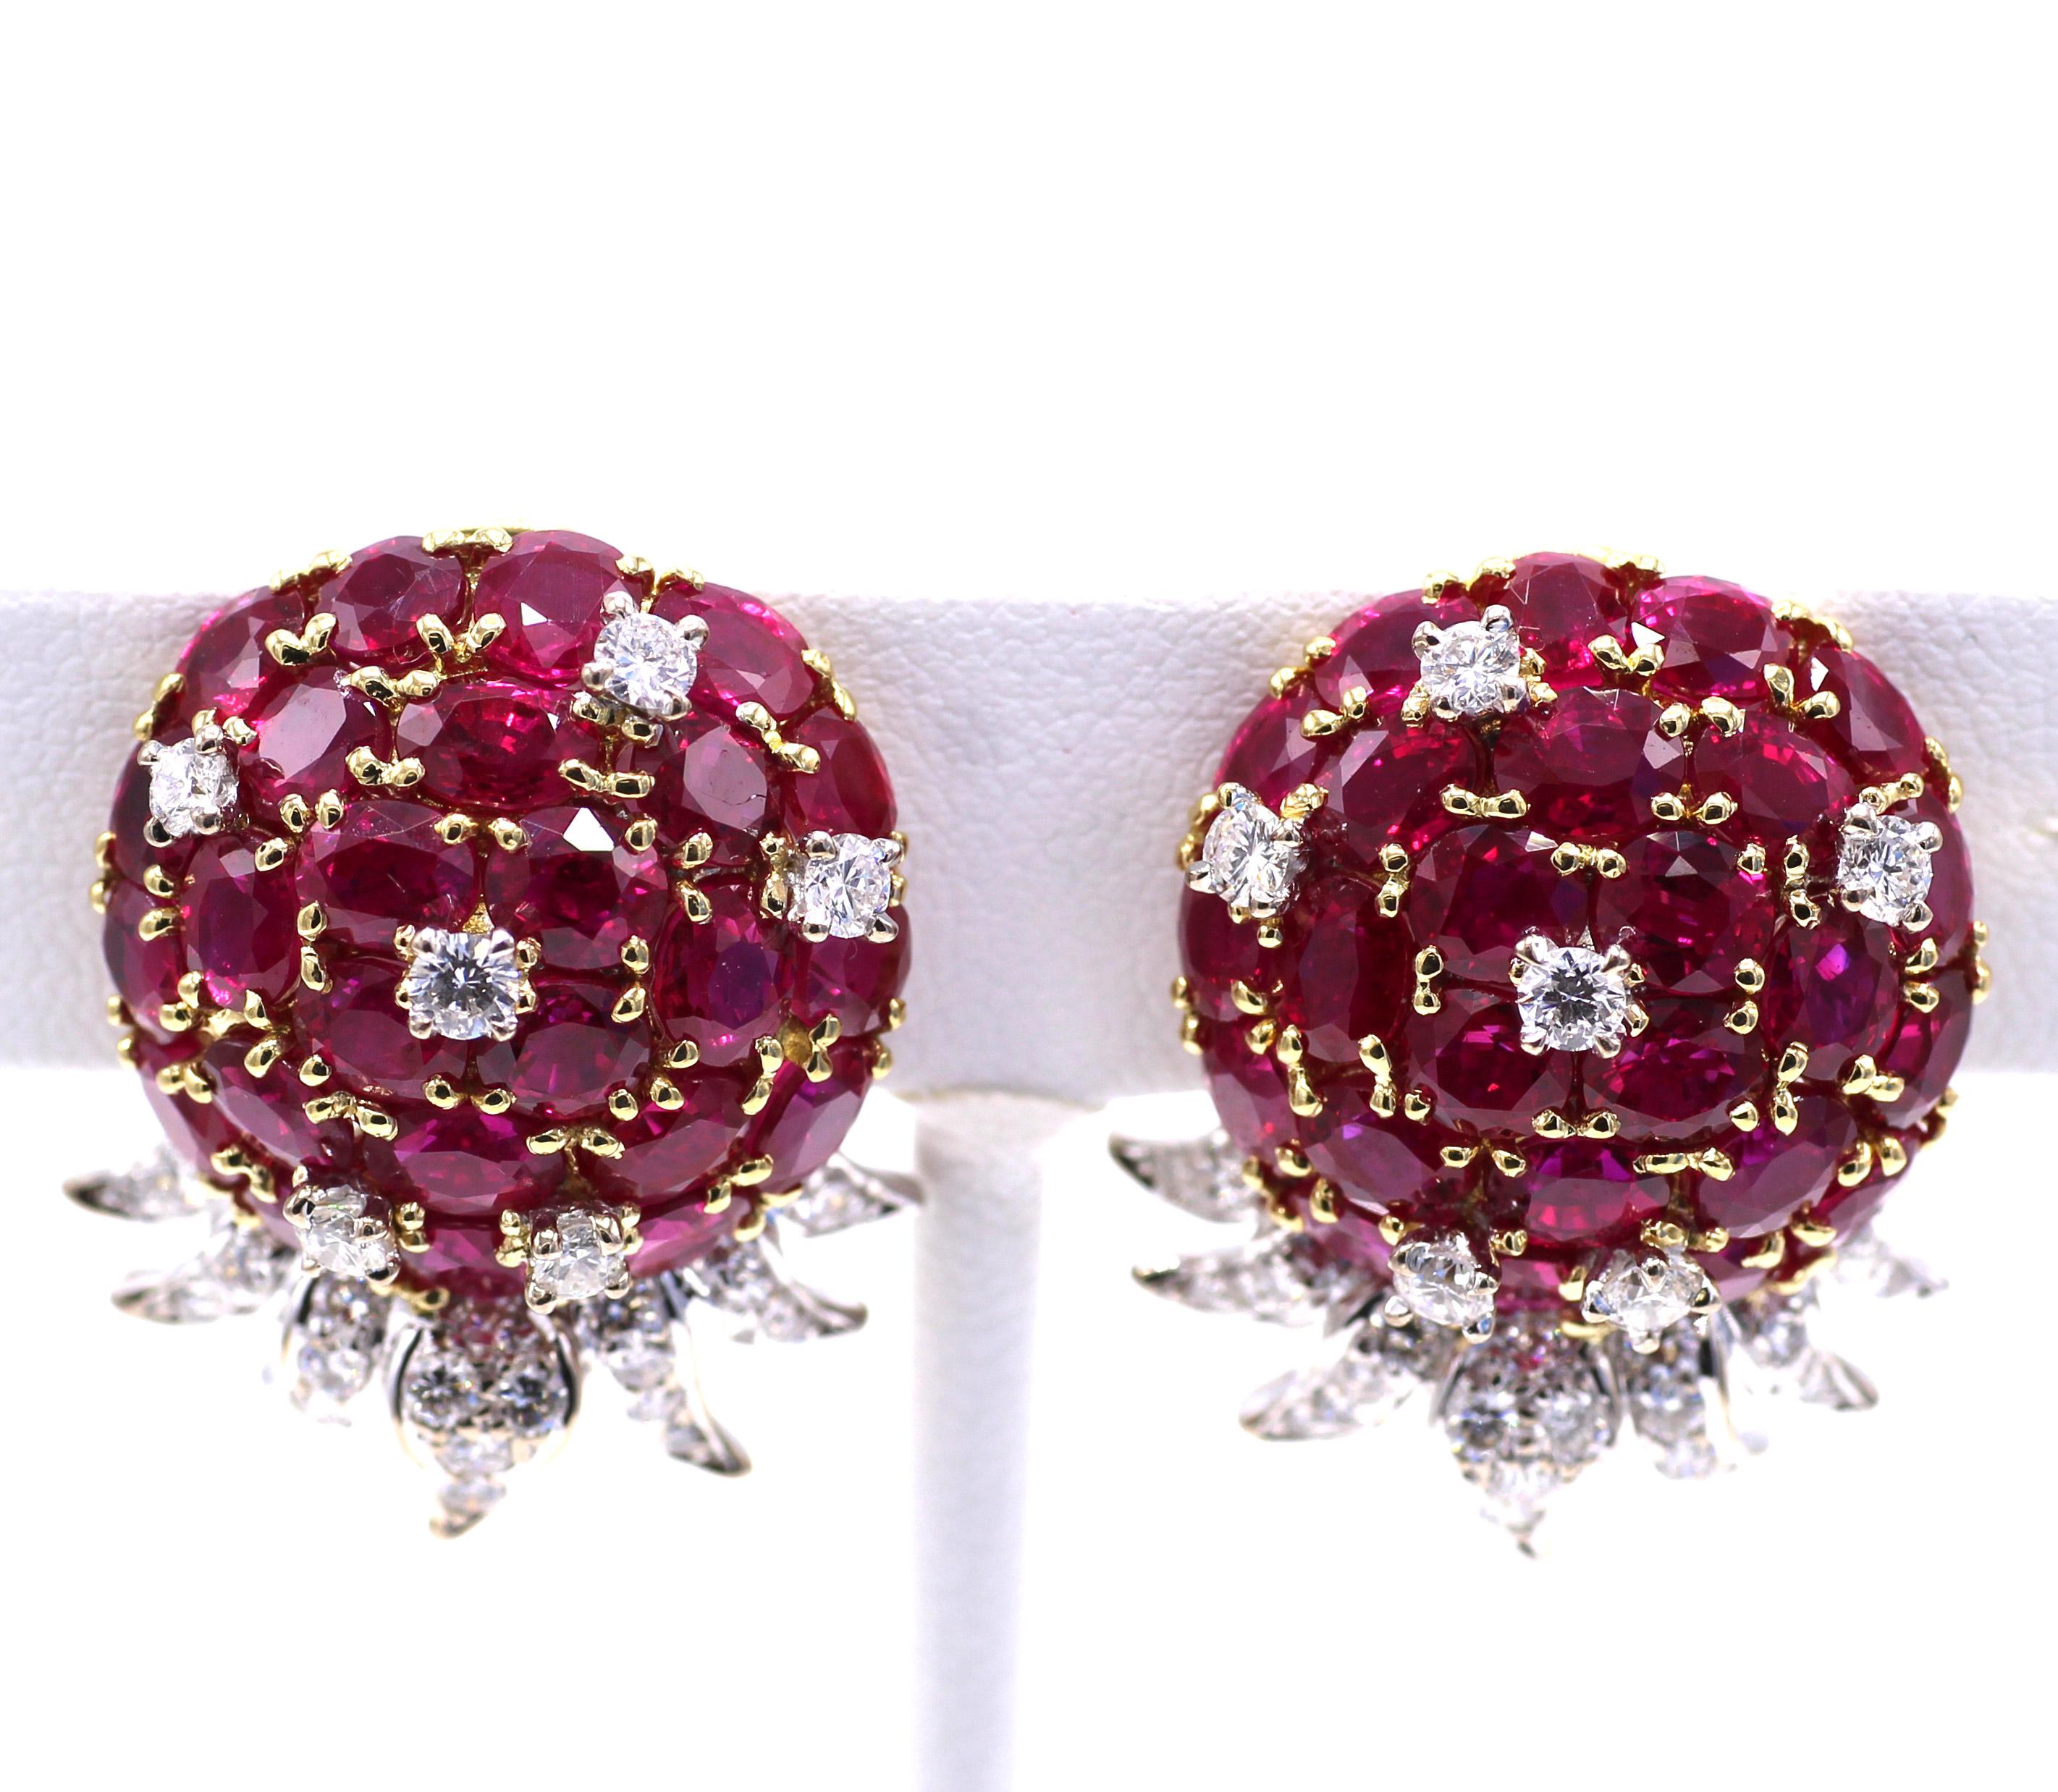 Beautifully designed and masterfully handcrafted these colorful earrings are set with 25 perfectly matched pigeon blood red rubies, in each earring embellished by 6 bright white and lively round brilliant cut diamonds. Beneath the center piece 7